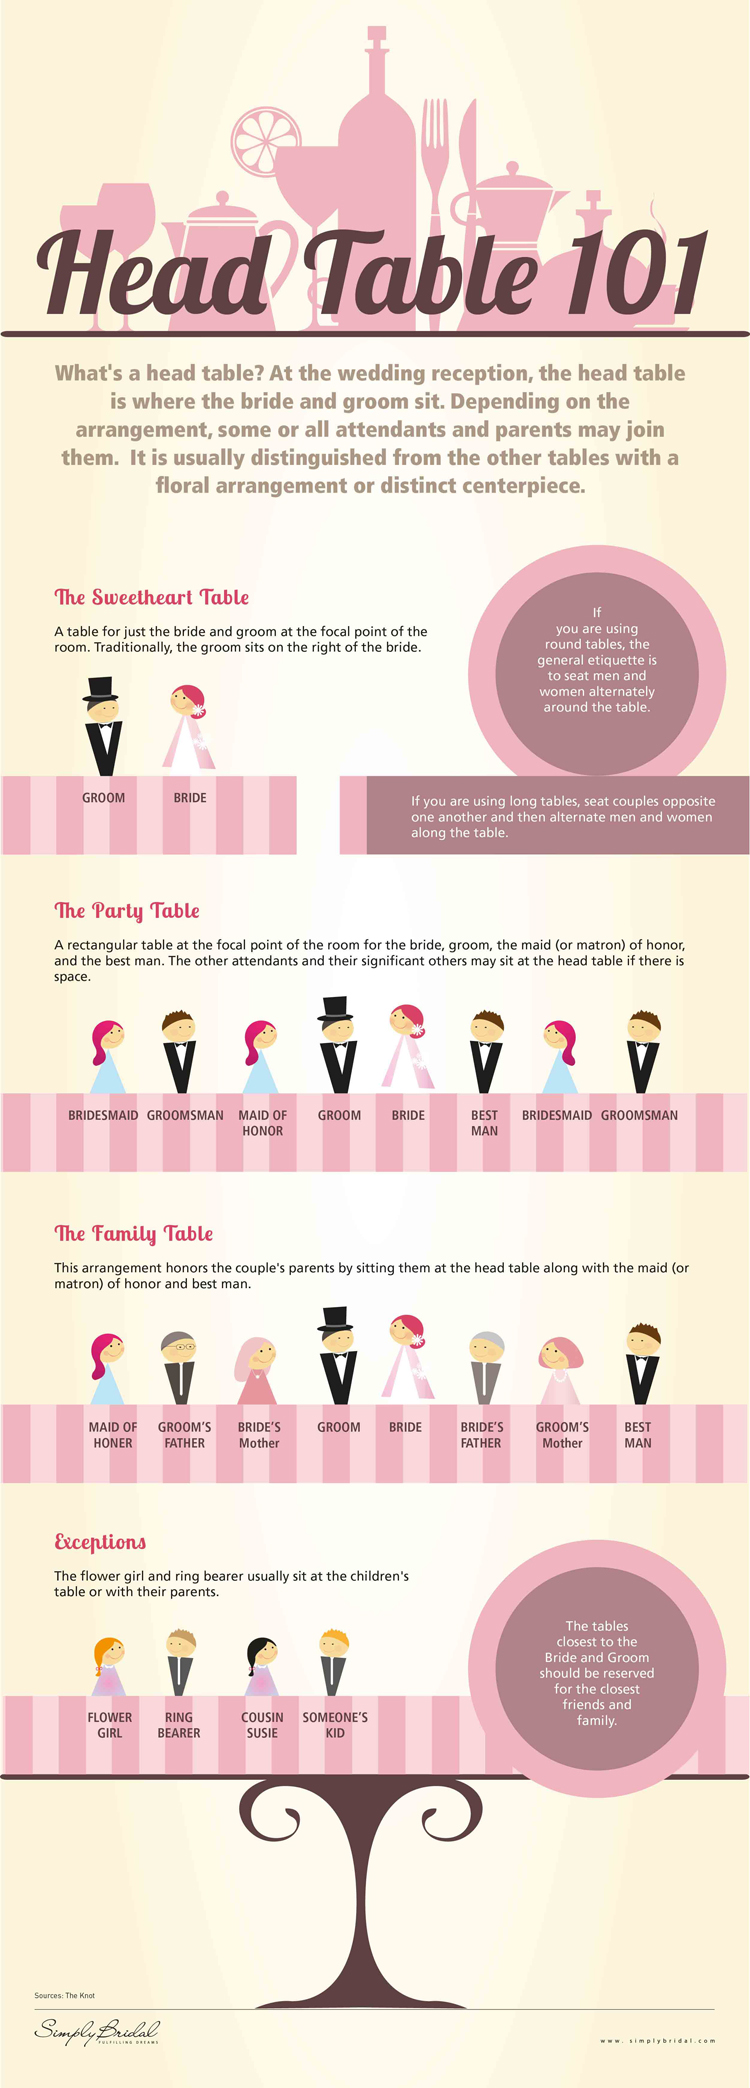 Head Table 101 Infographic